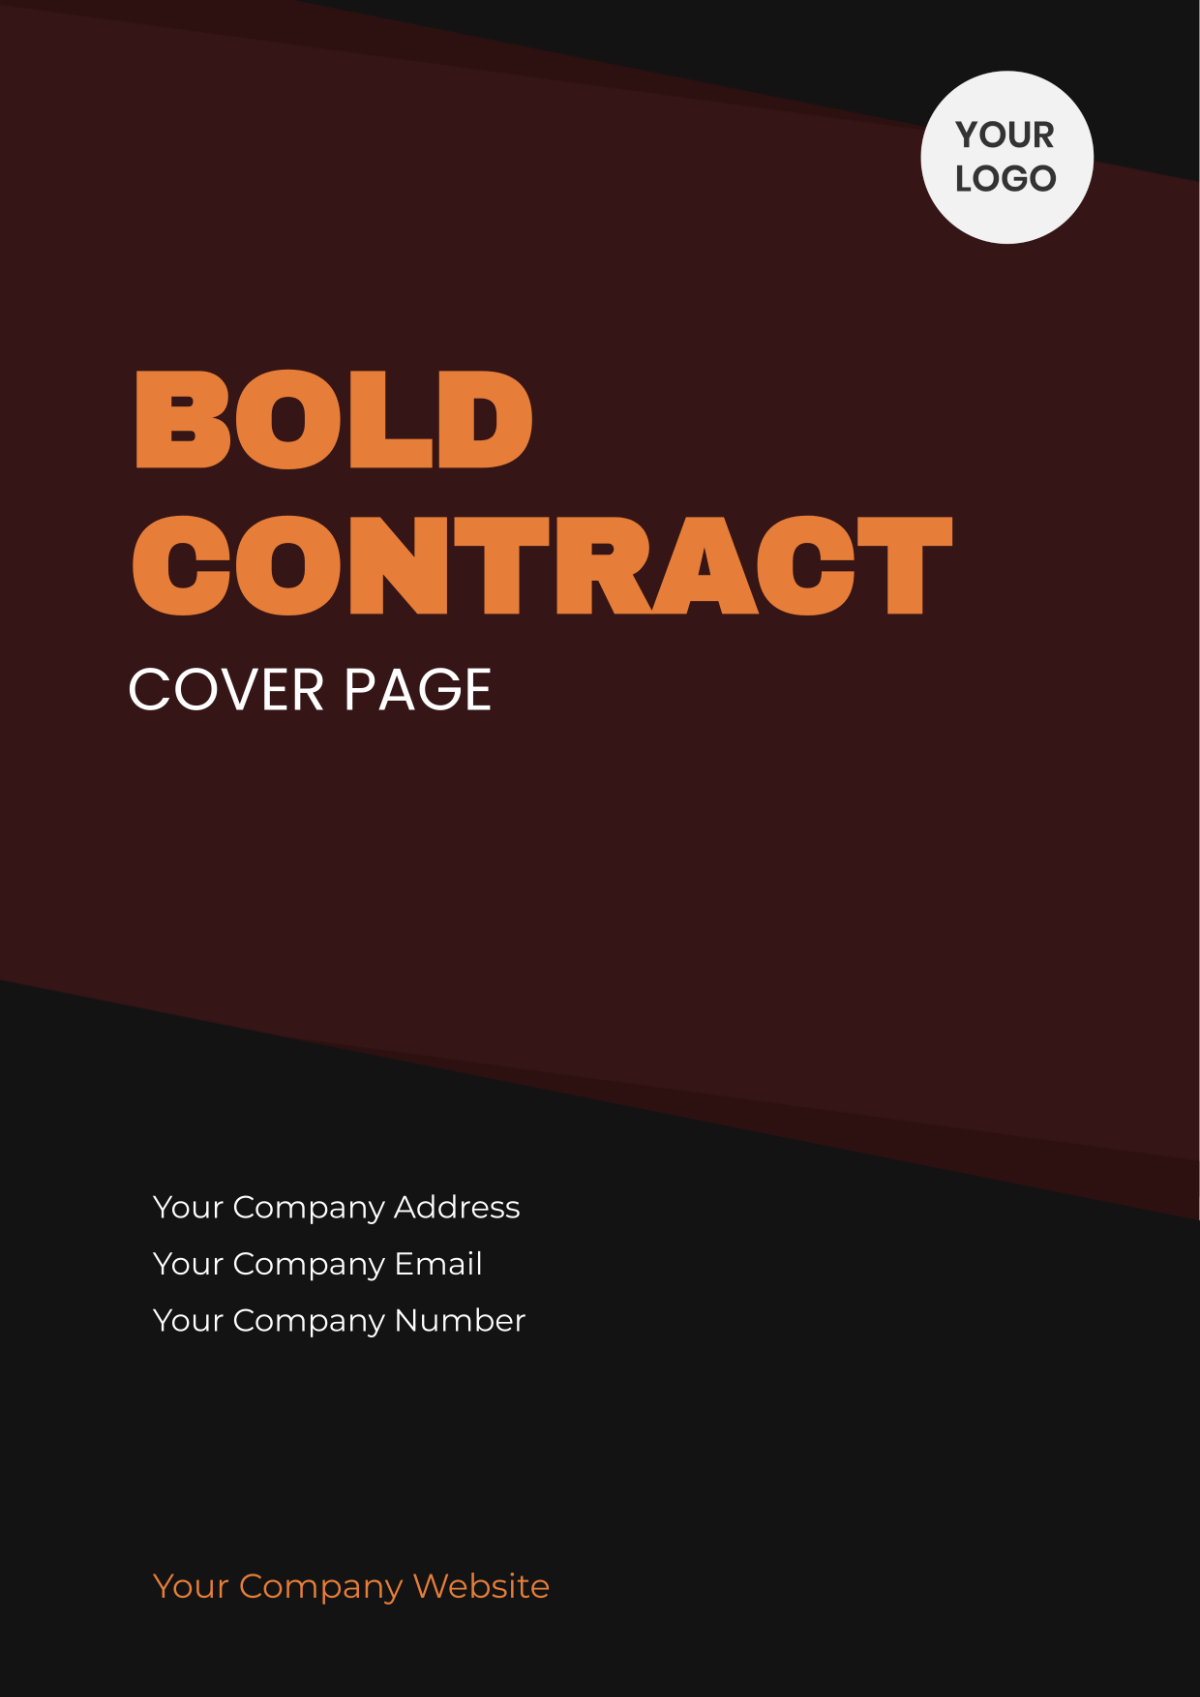 Bold Contract Cover Page